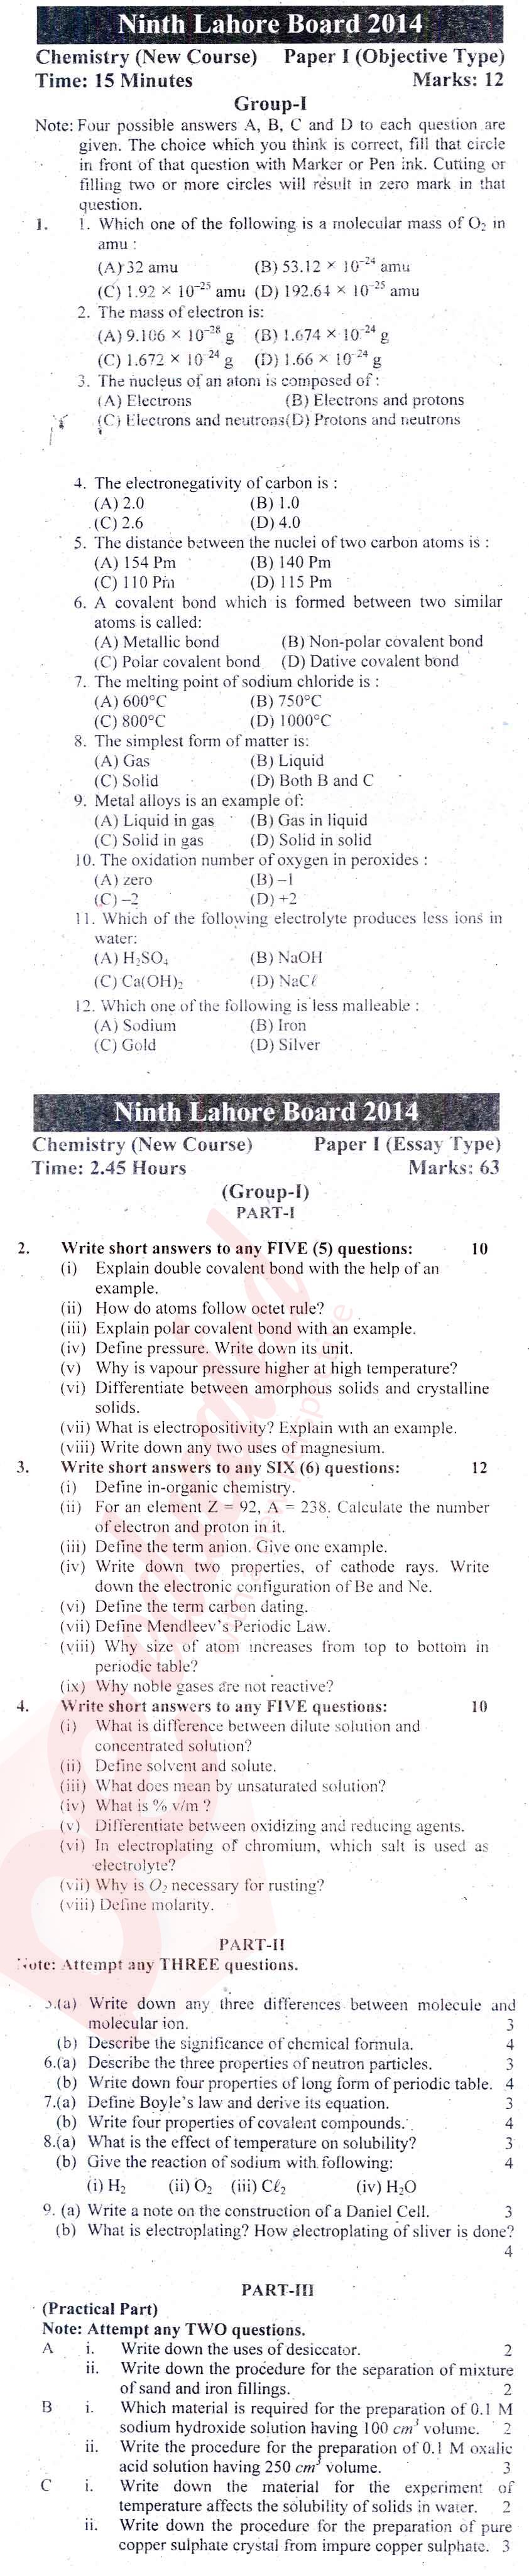 Chemistry 9th English Medium Past Paper Group 1 BISE Lahore 2014